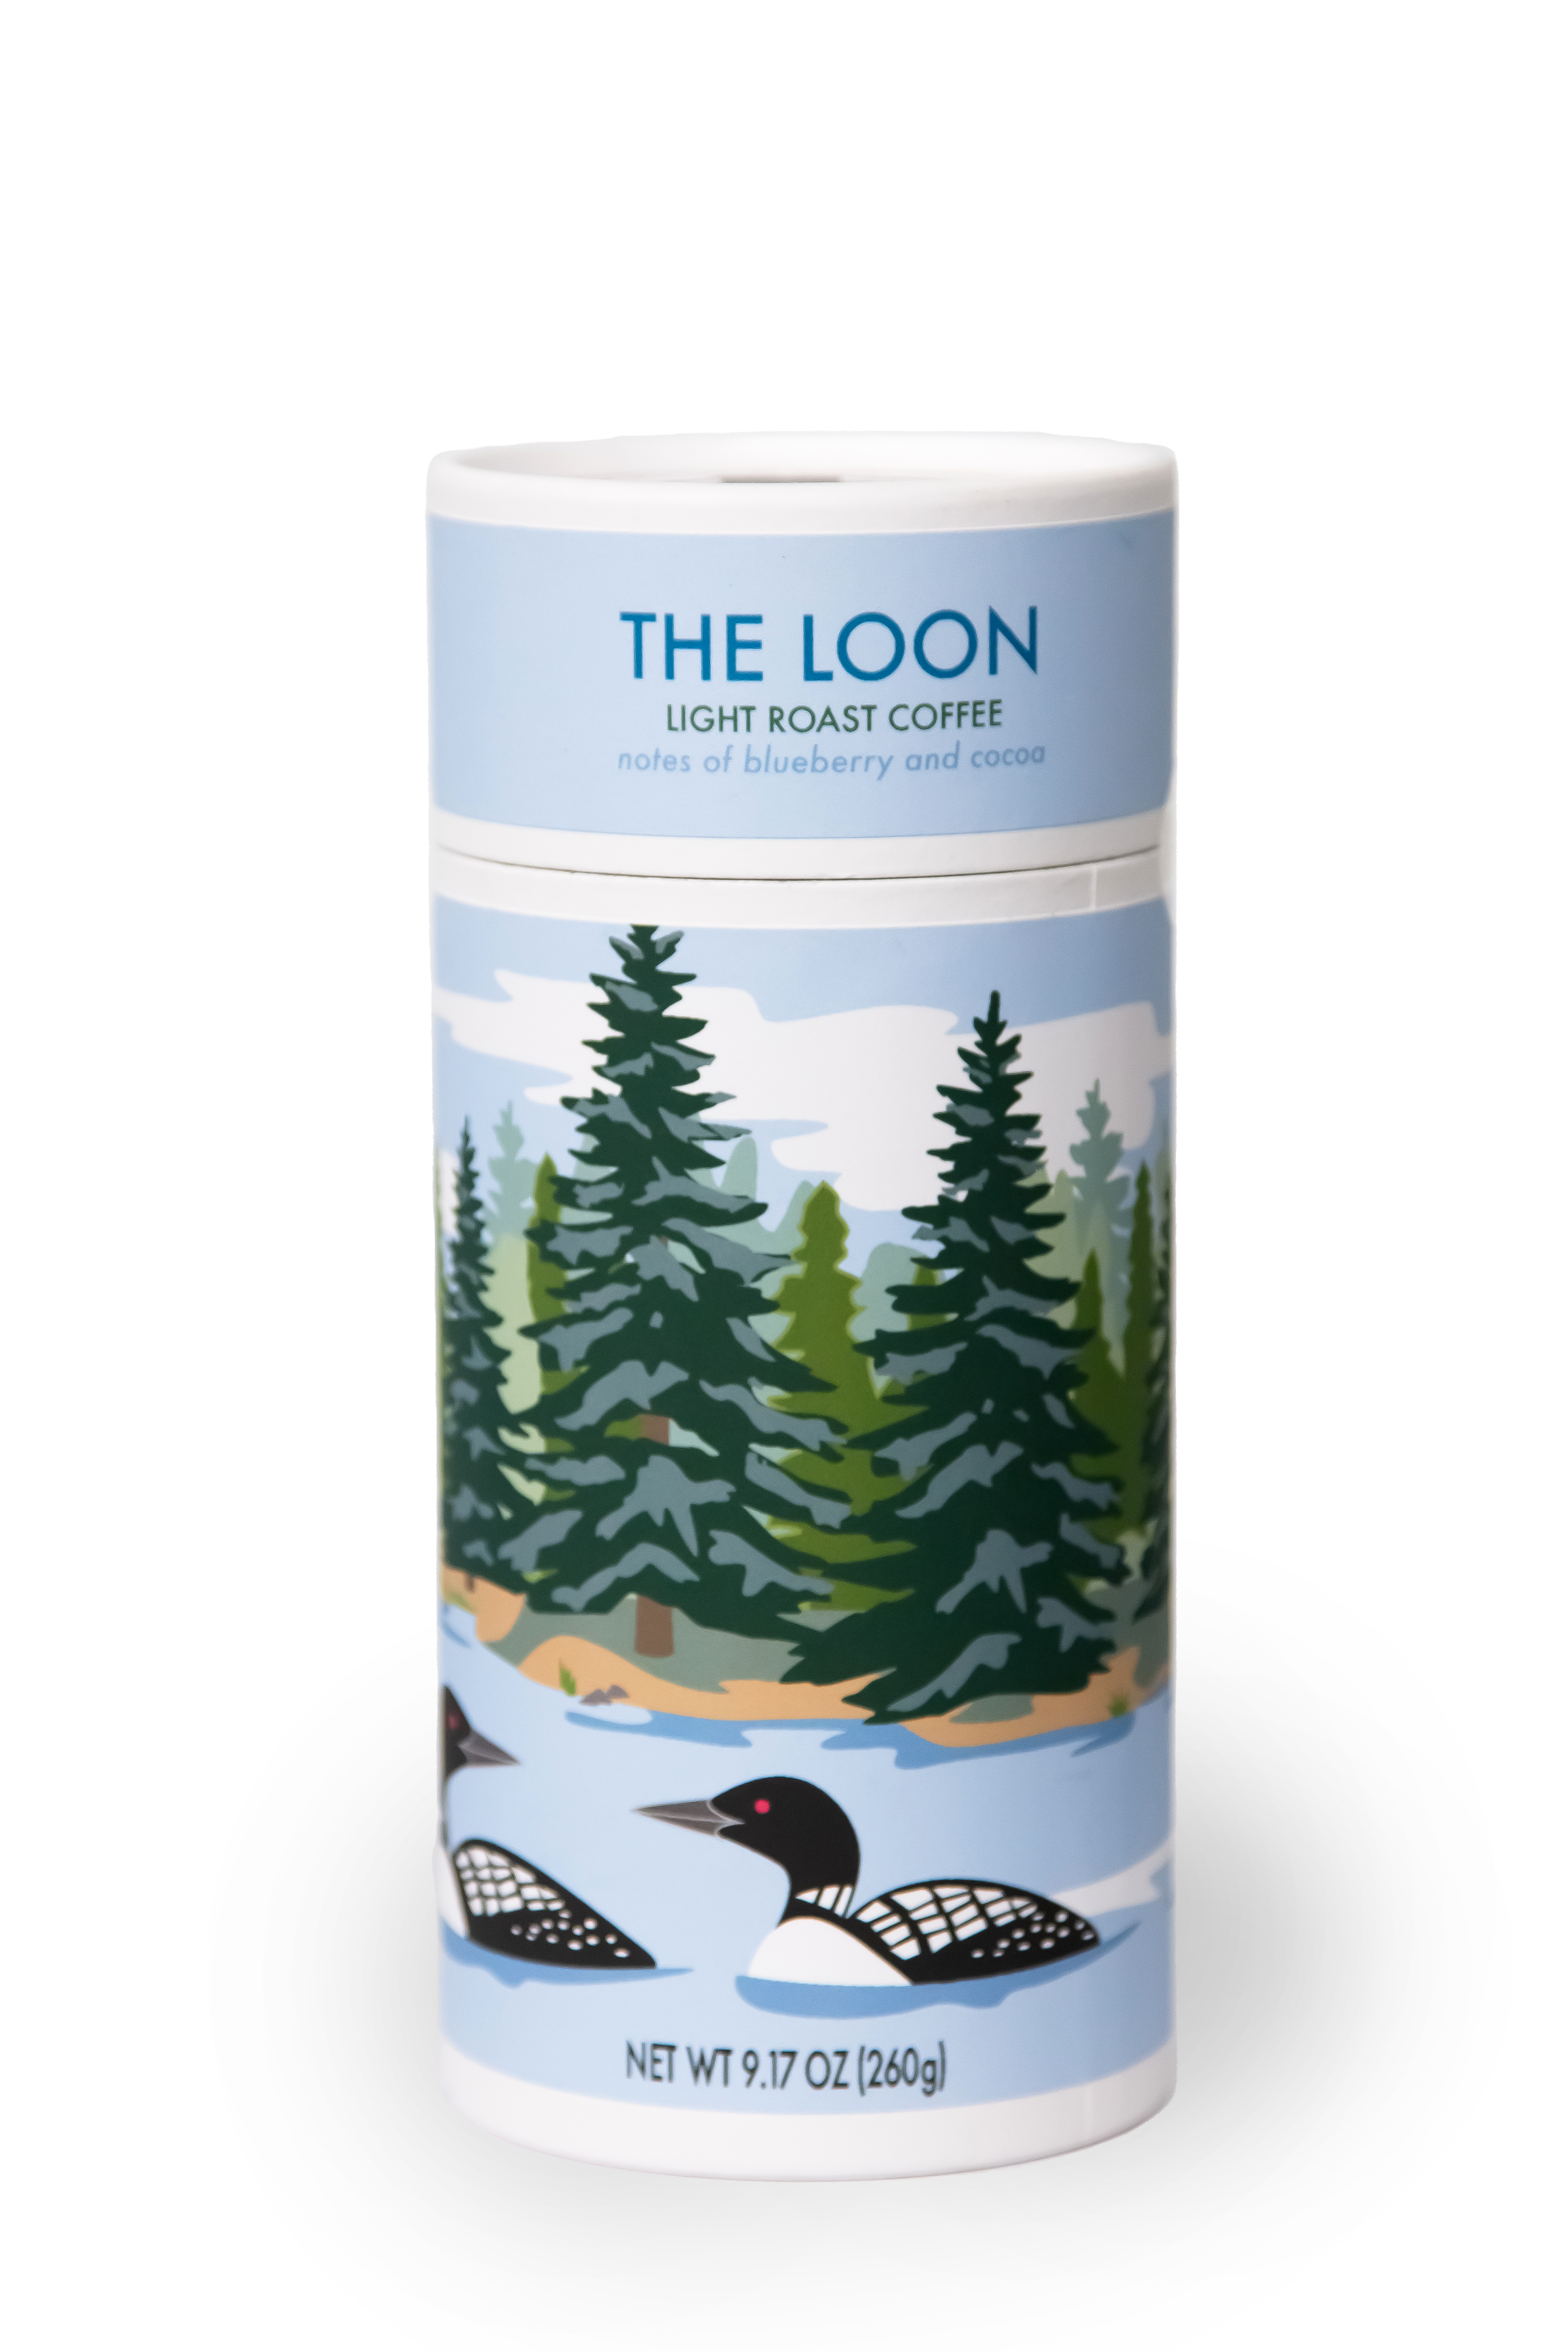 The Loon